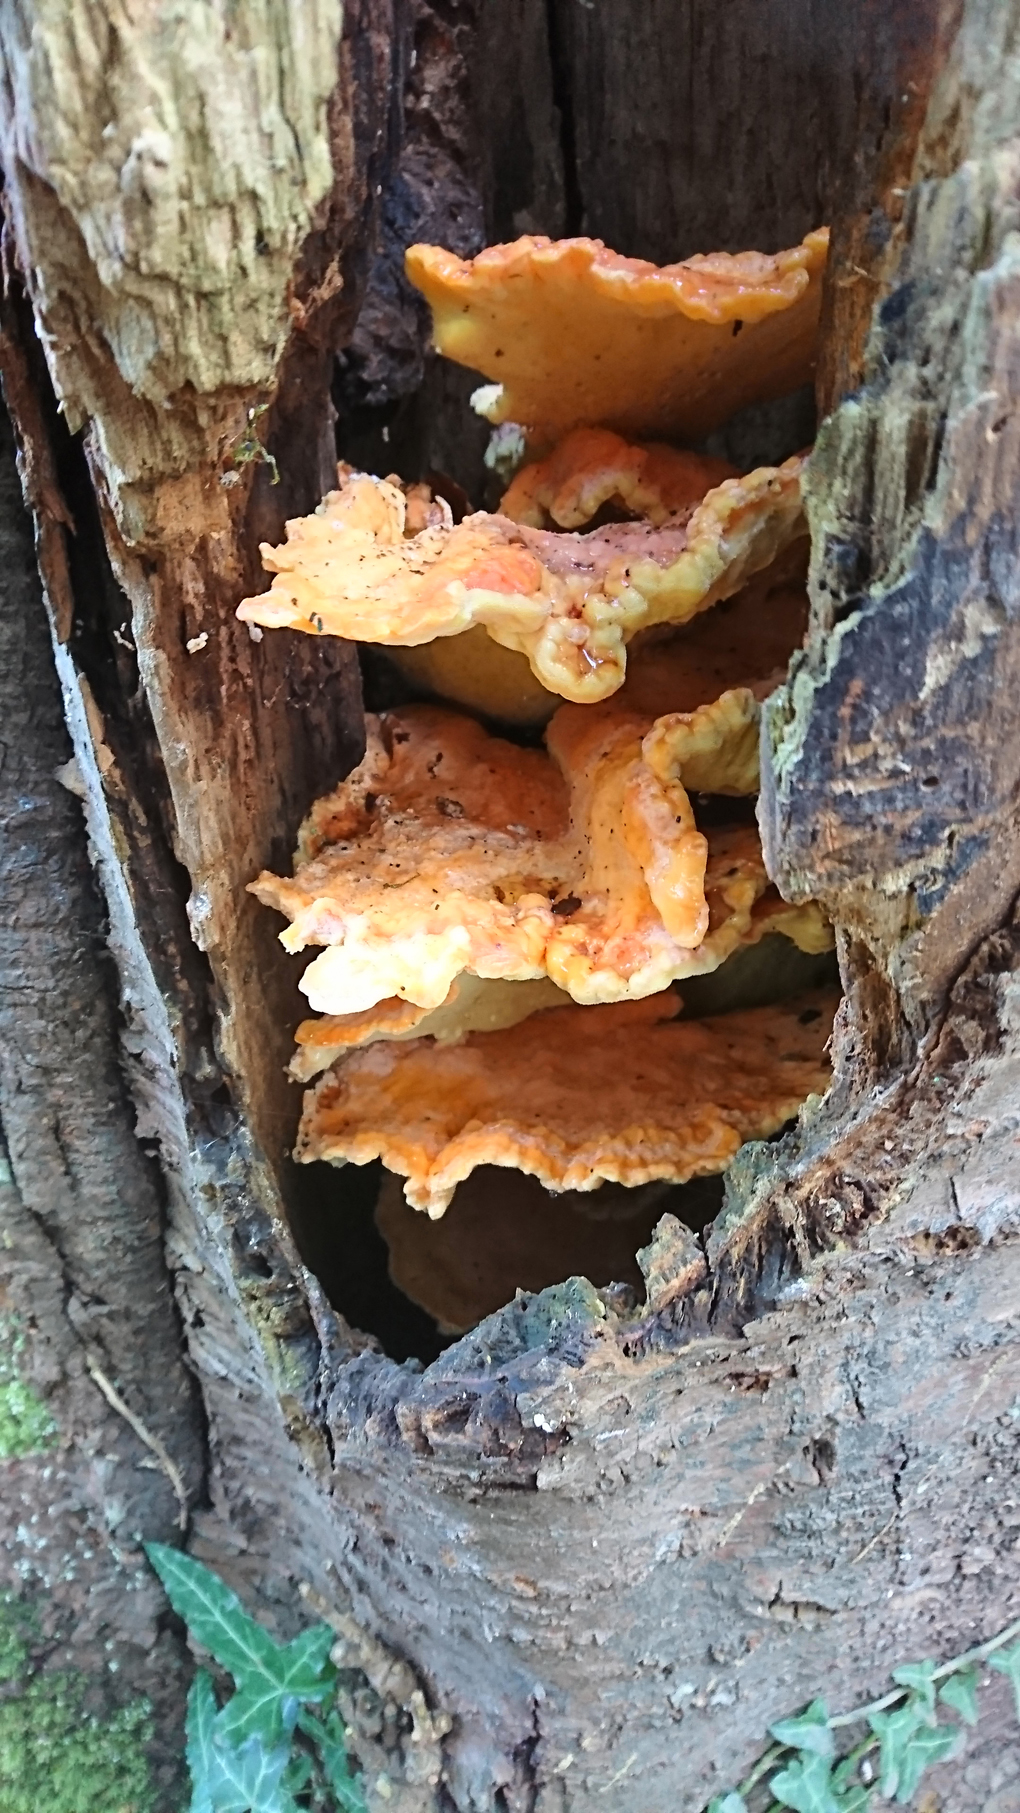 Upon walking in the woods on a rare dry day this month, I discovered this beautiful bright orange fungus peeping out of a hollowed out tree trunk. It was composed of several layers of fungi ‘plates’ each having a crinkled edge. It was quite large and filled the hollow with its vivid display. A great find which some could well have missed!